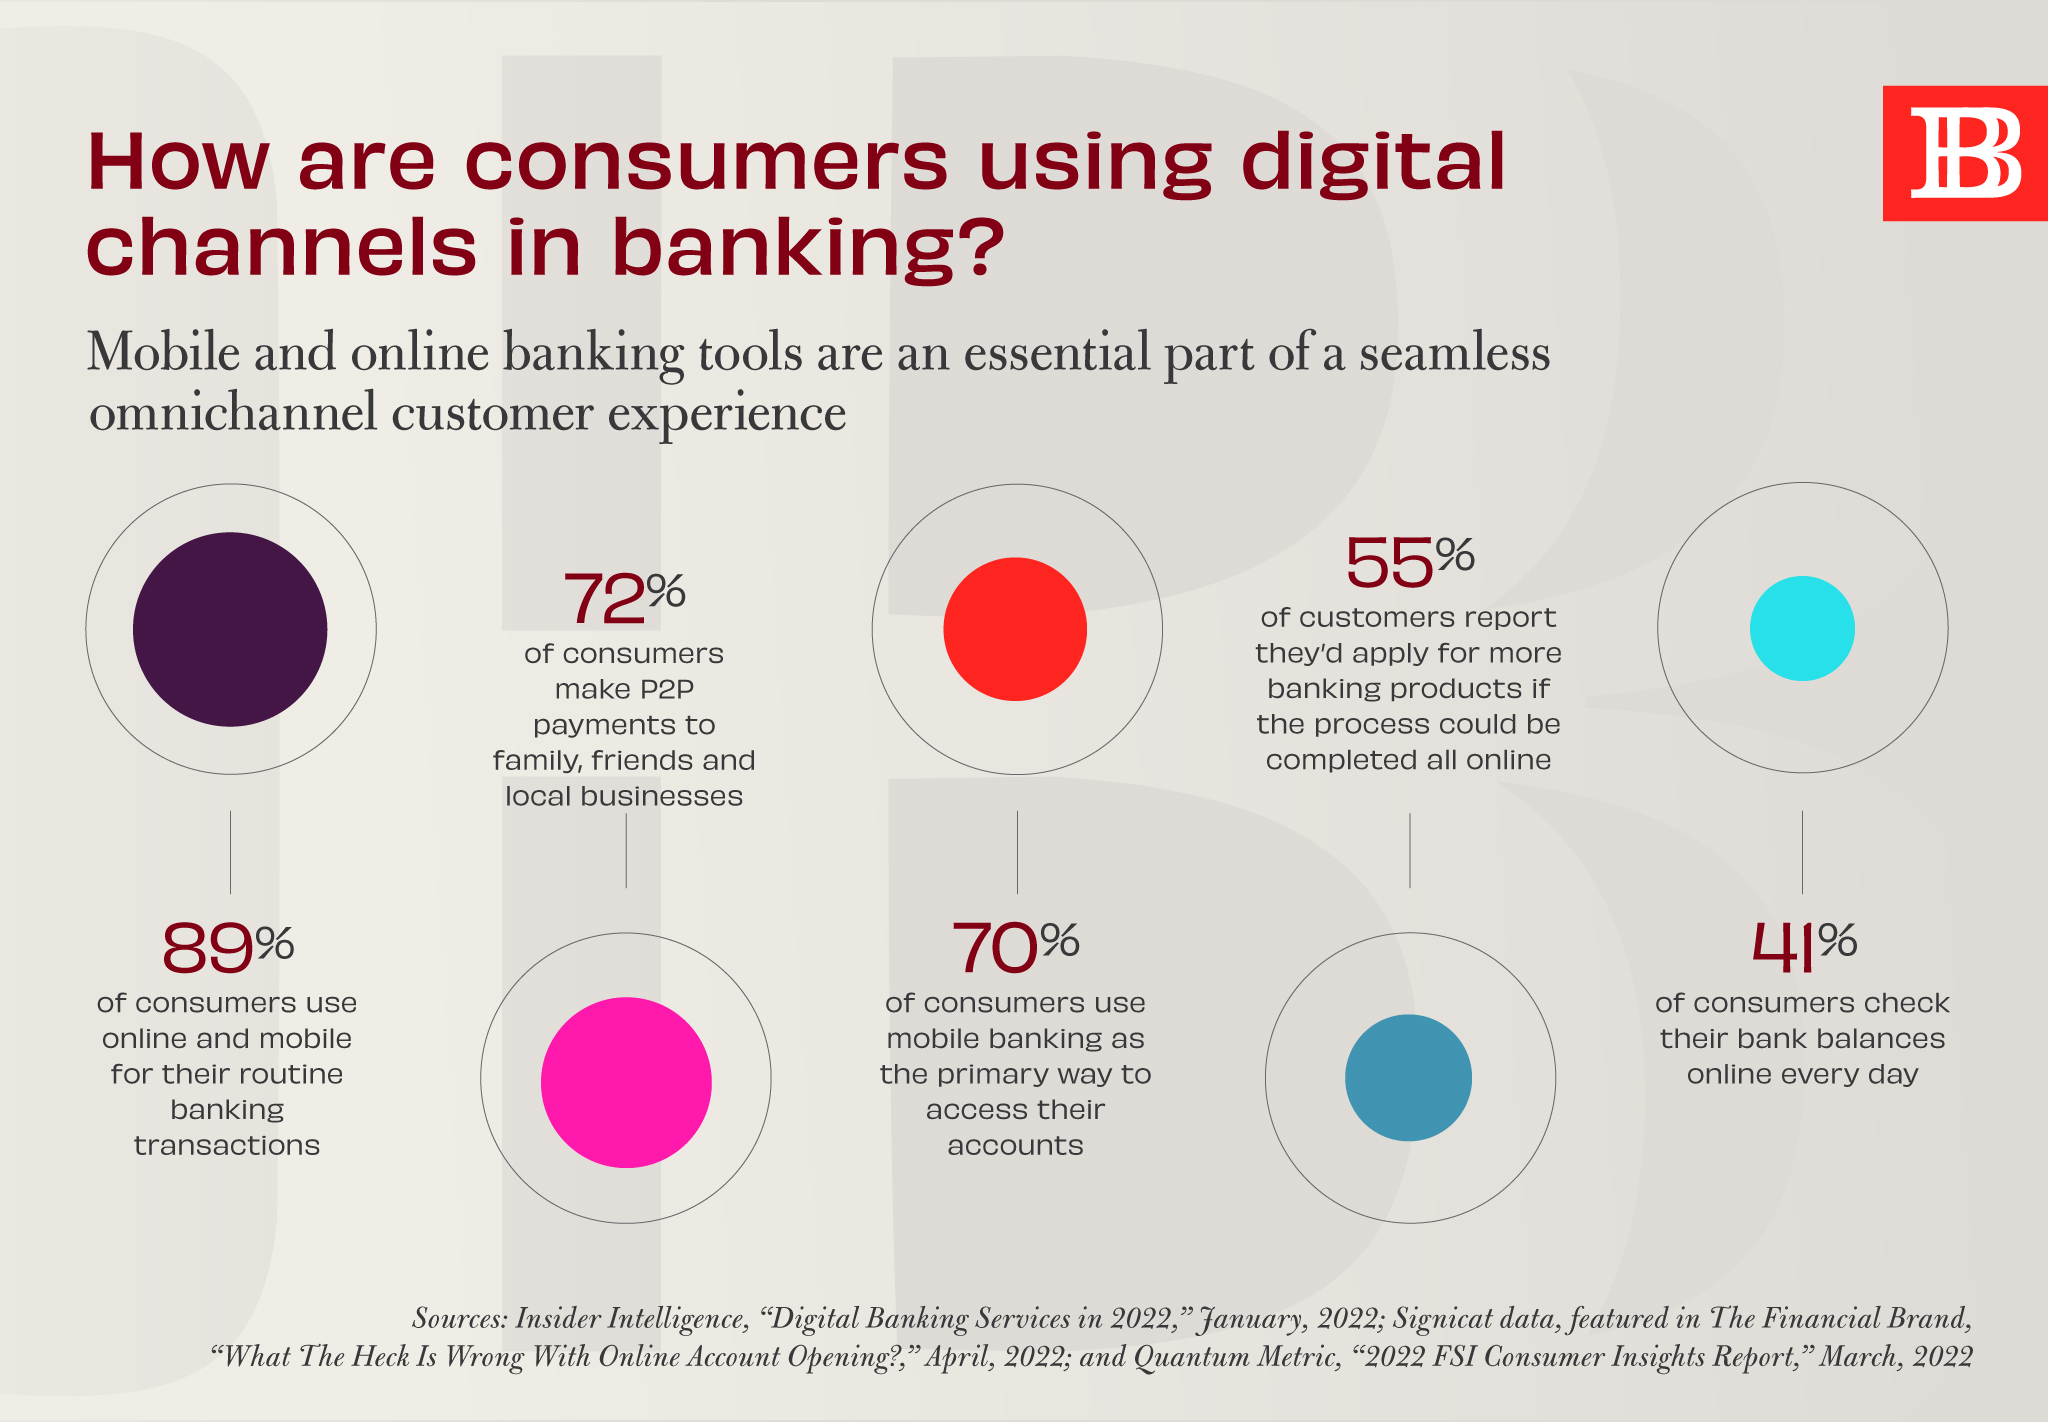 How are consumers using digital channels in banking?